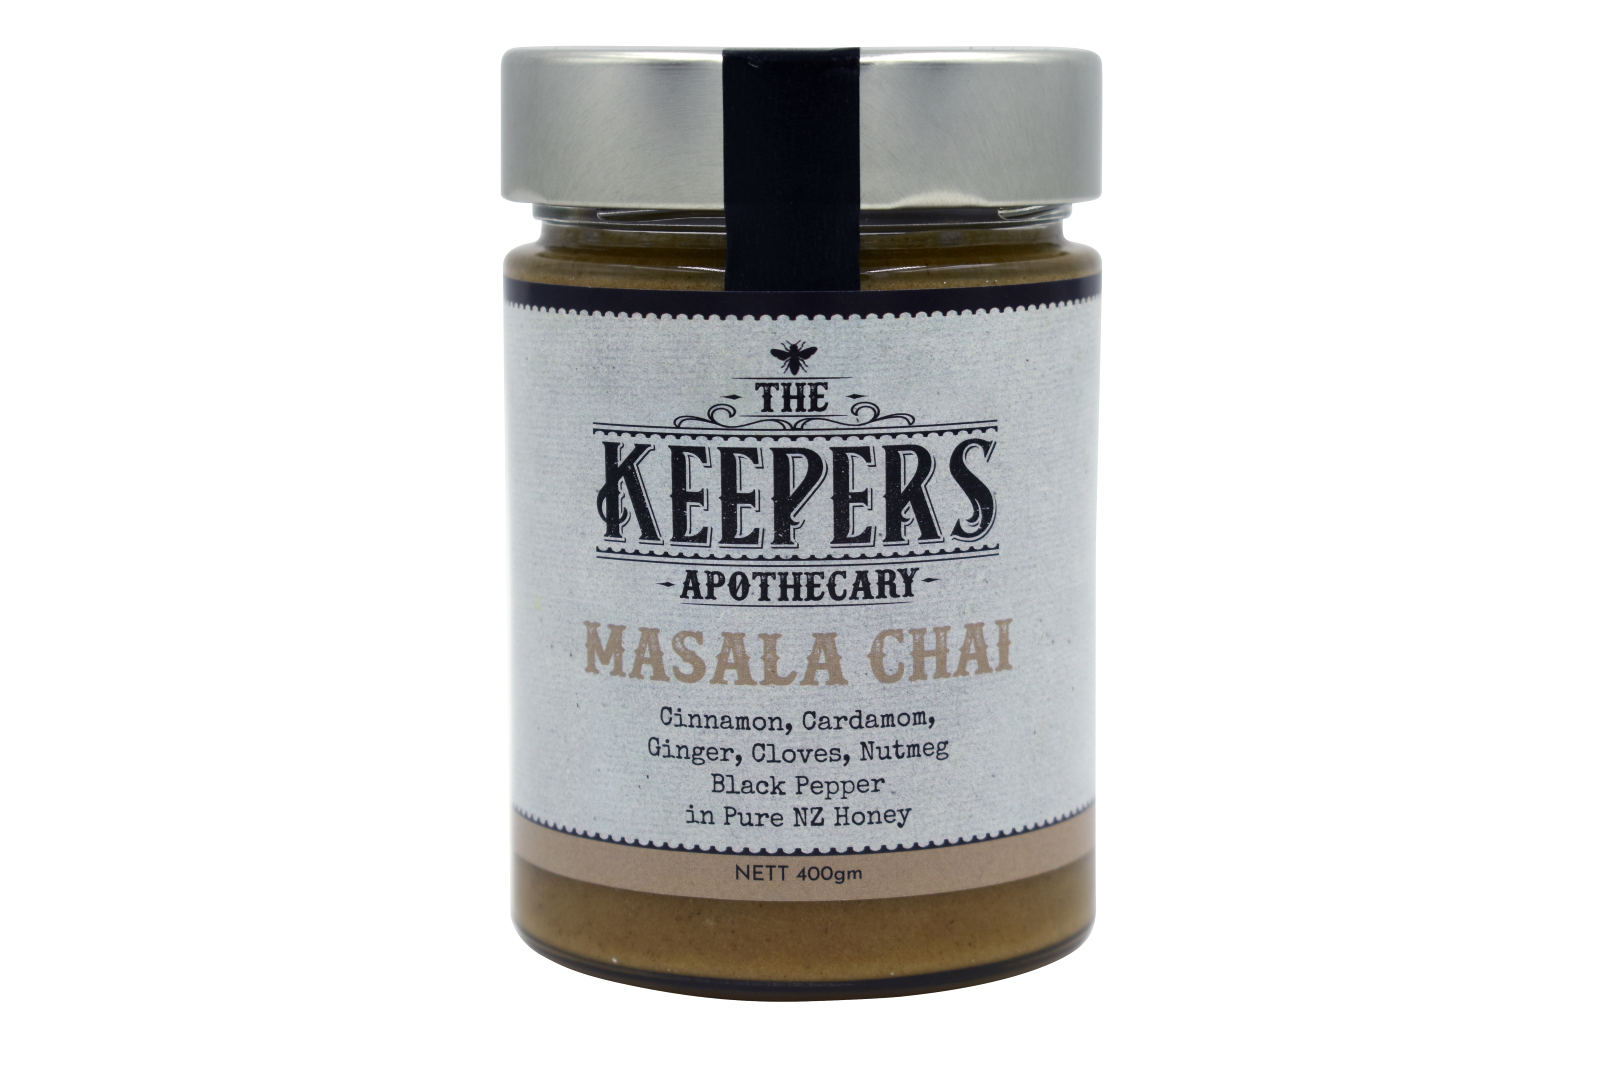 The Keepers Apothecary Masala Chai 400g